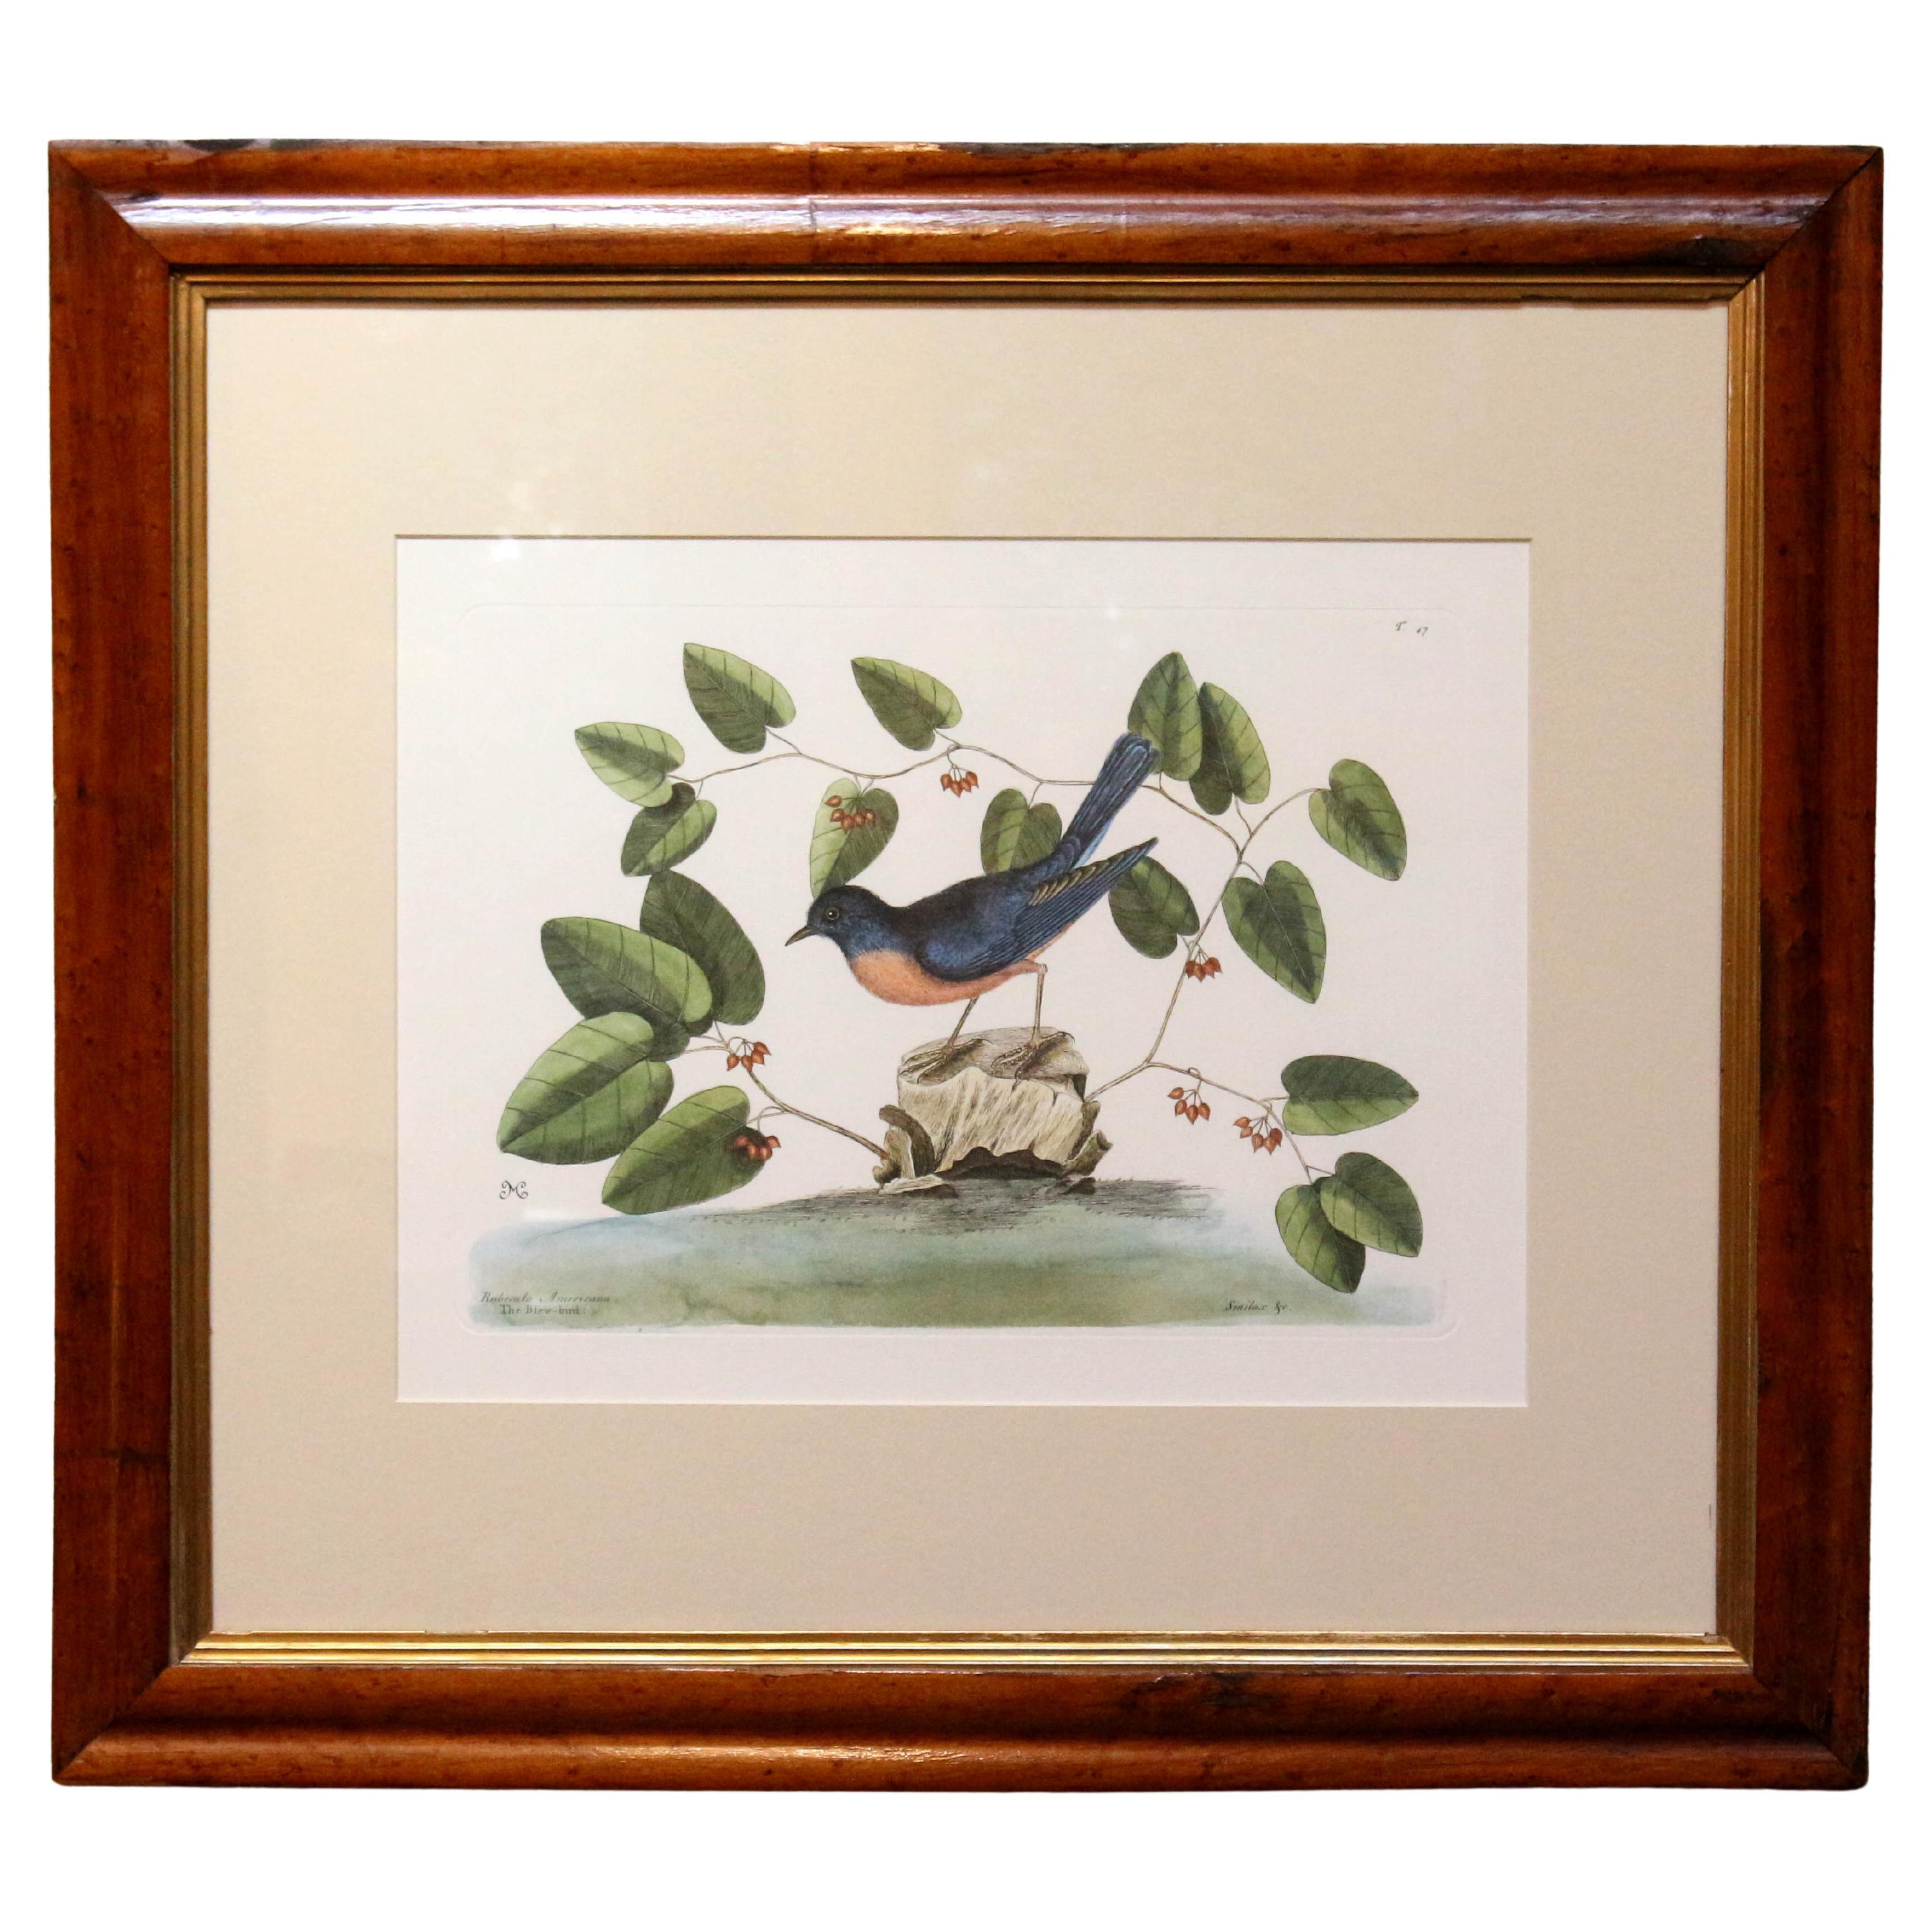 20th Century "The Blew-bird" Print, Copy of the Engraving by Mark Catesby For Sale